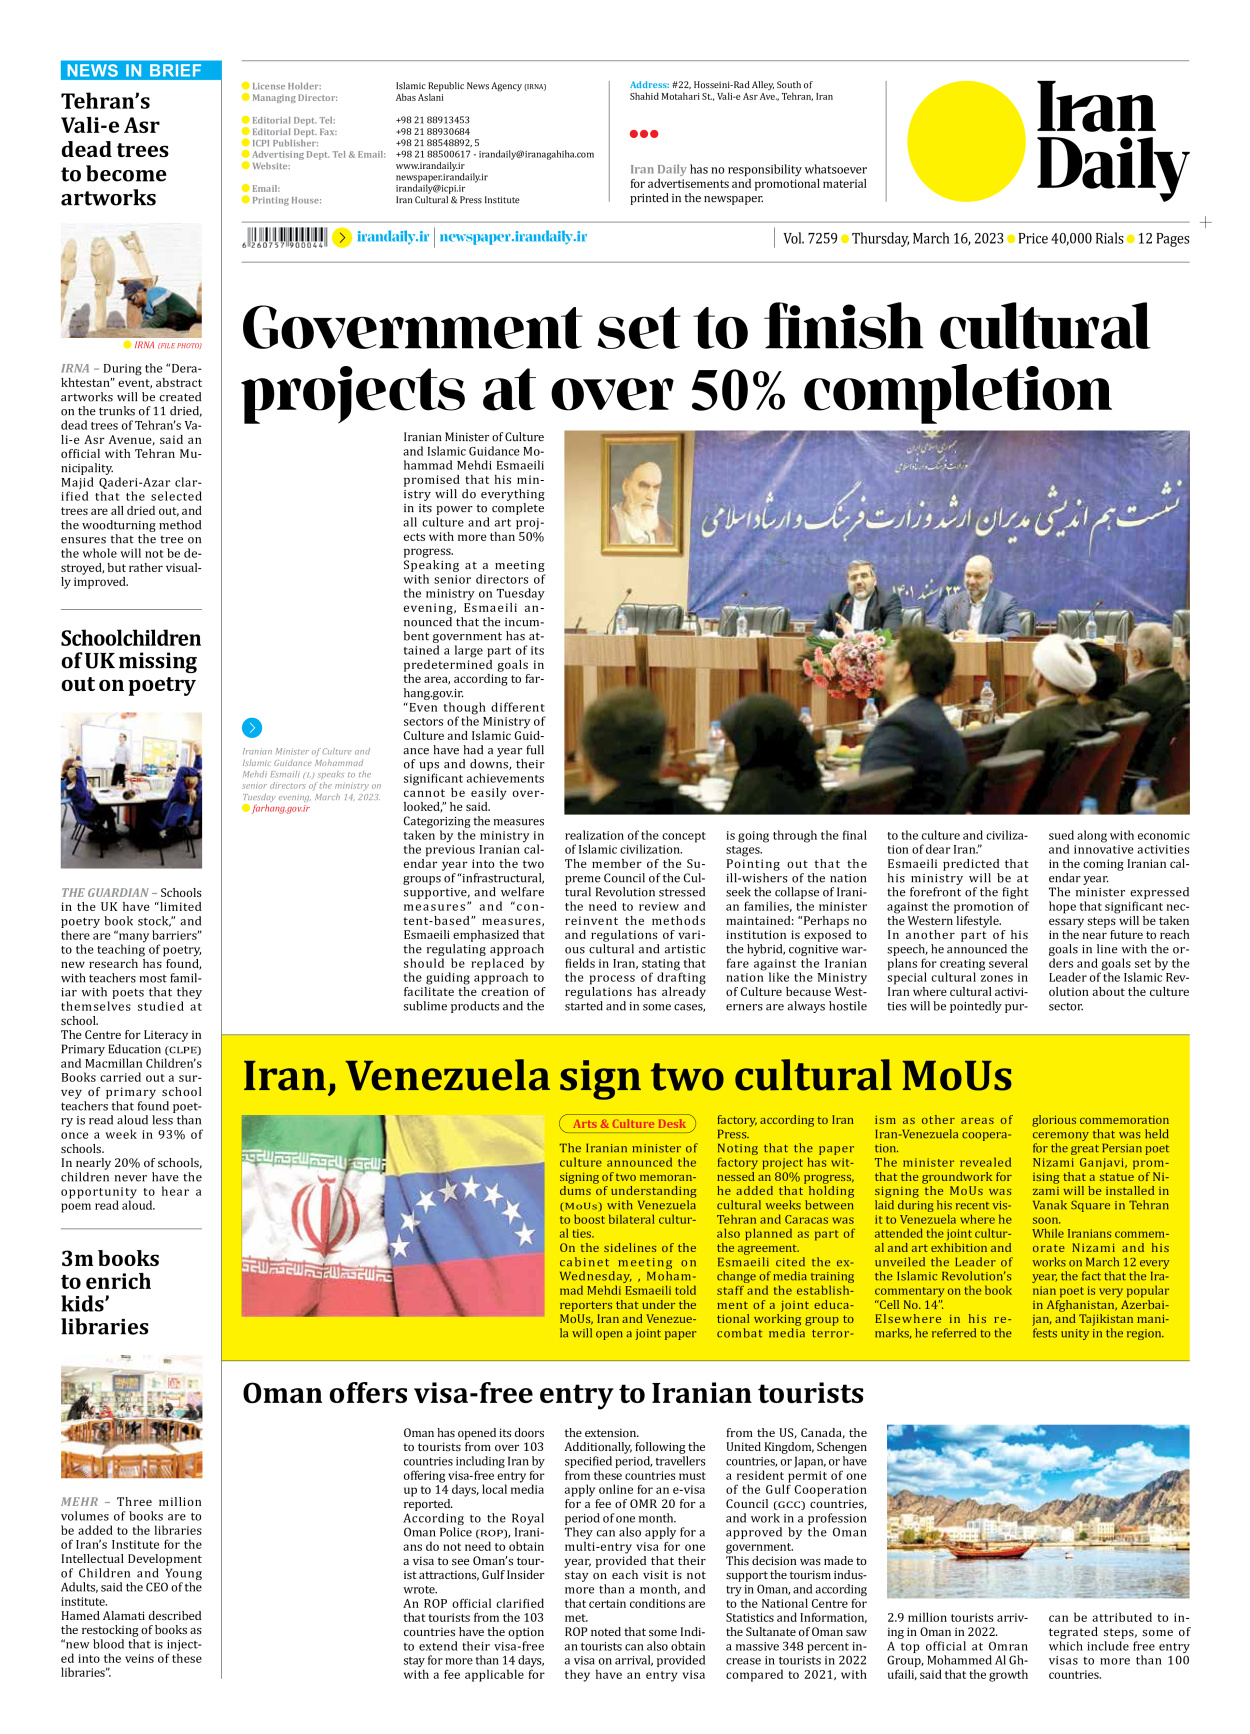 Iran Daily - Number Seven Thousand Two Hundred and Fifty Nine - 16 March 2023 - Page 12